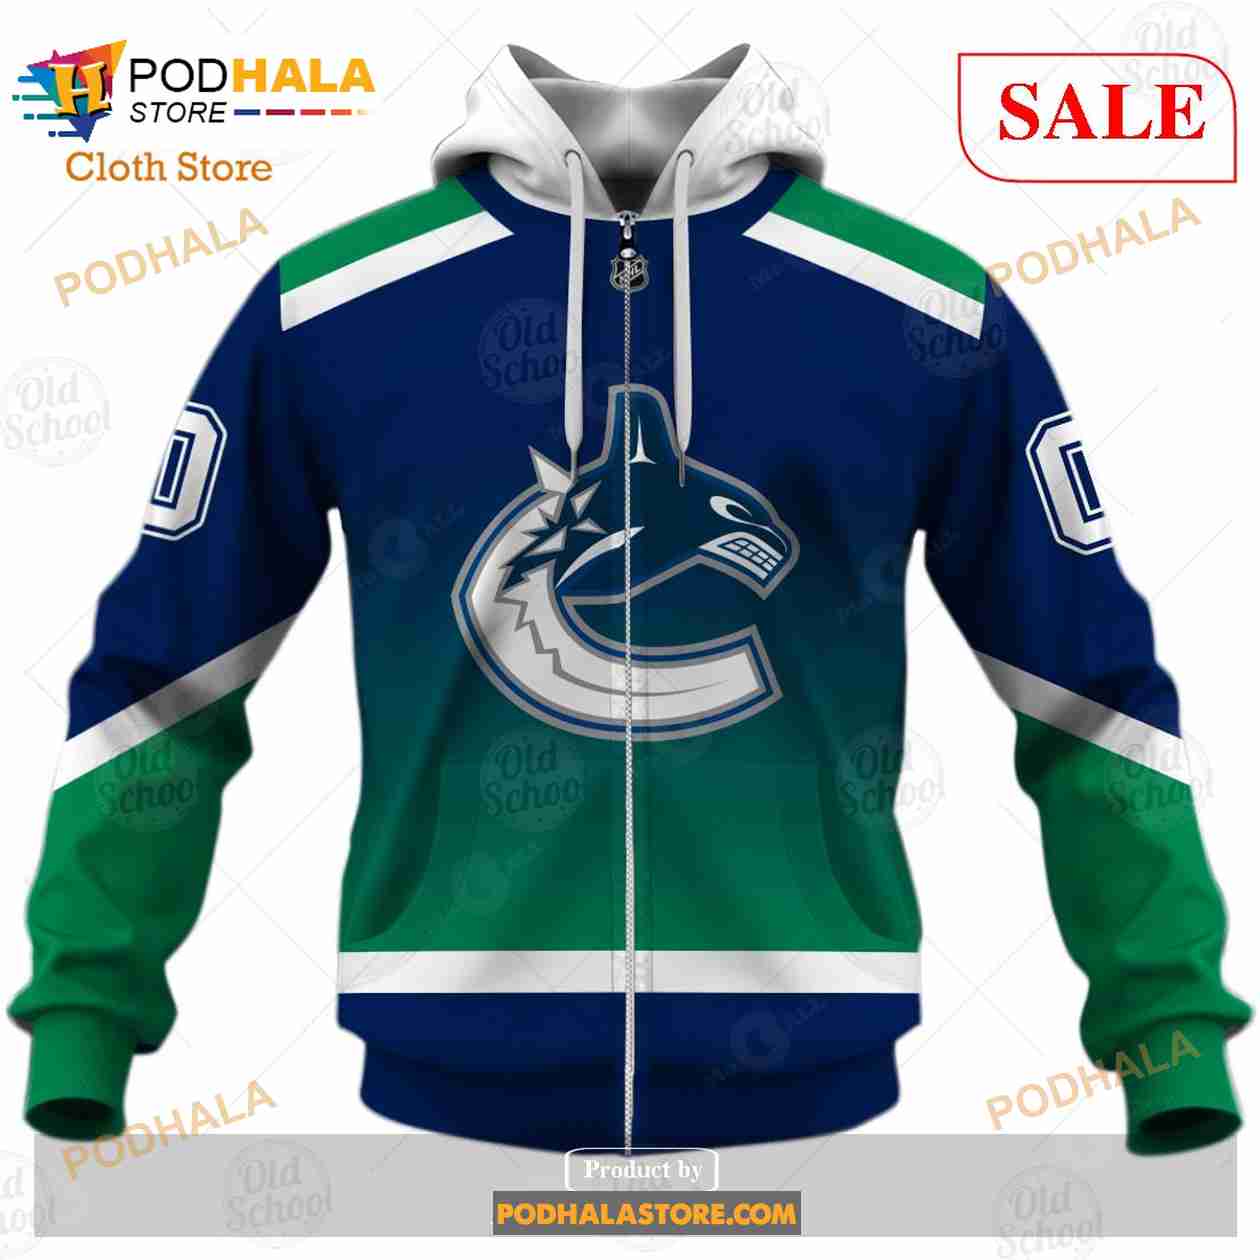 NHL, Sweaters, Vancouver Canucks Adult M Ugly Christmas Sweater Nhl  Sports Hockey Blue Green E2